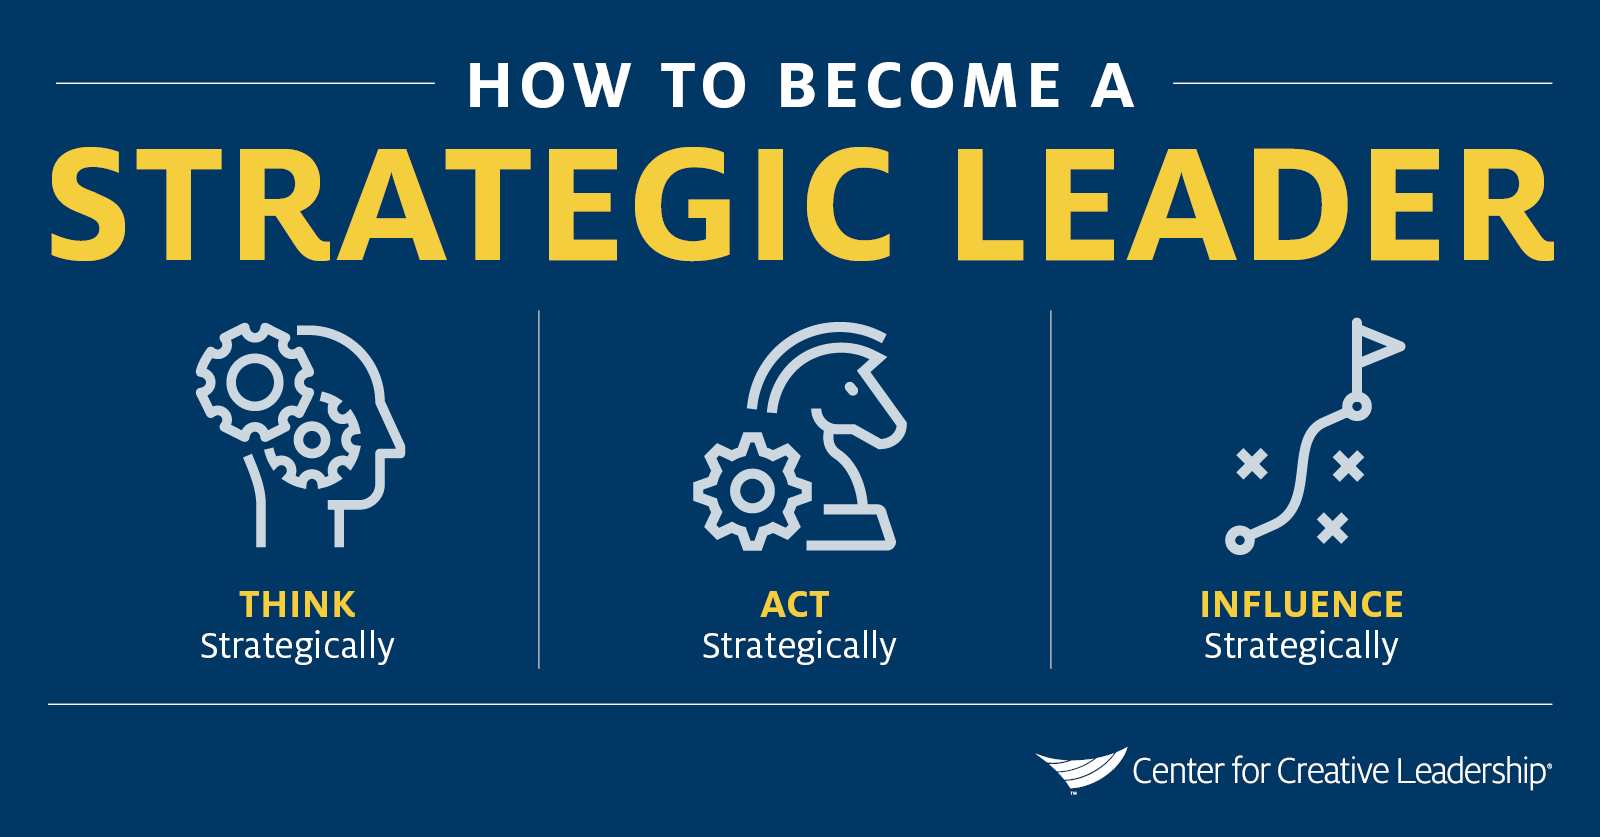 What is Strategic Leadership? Who is a Staretgic Leader? - Business Jargons